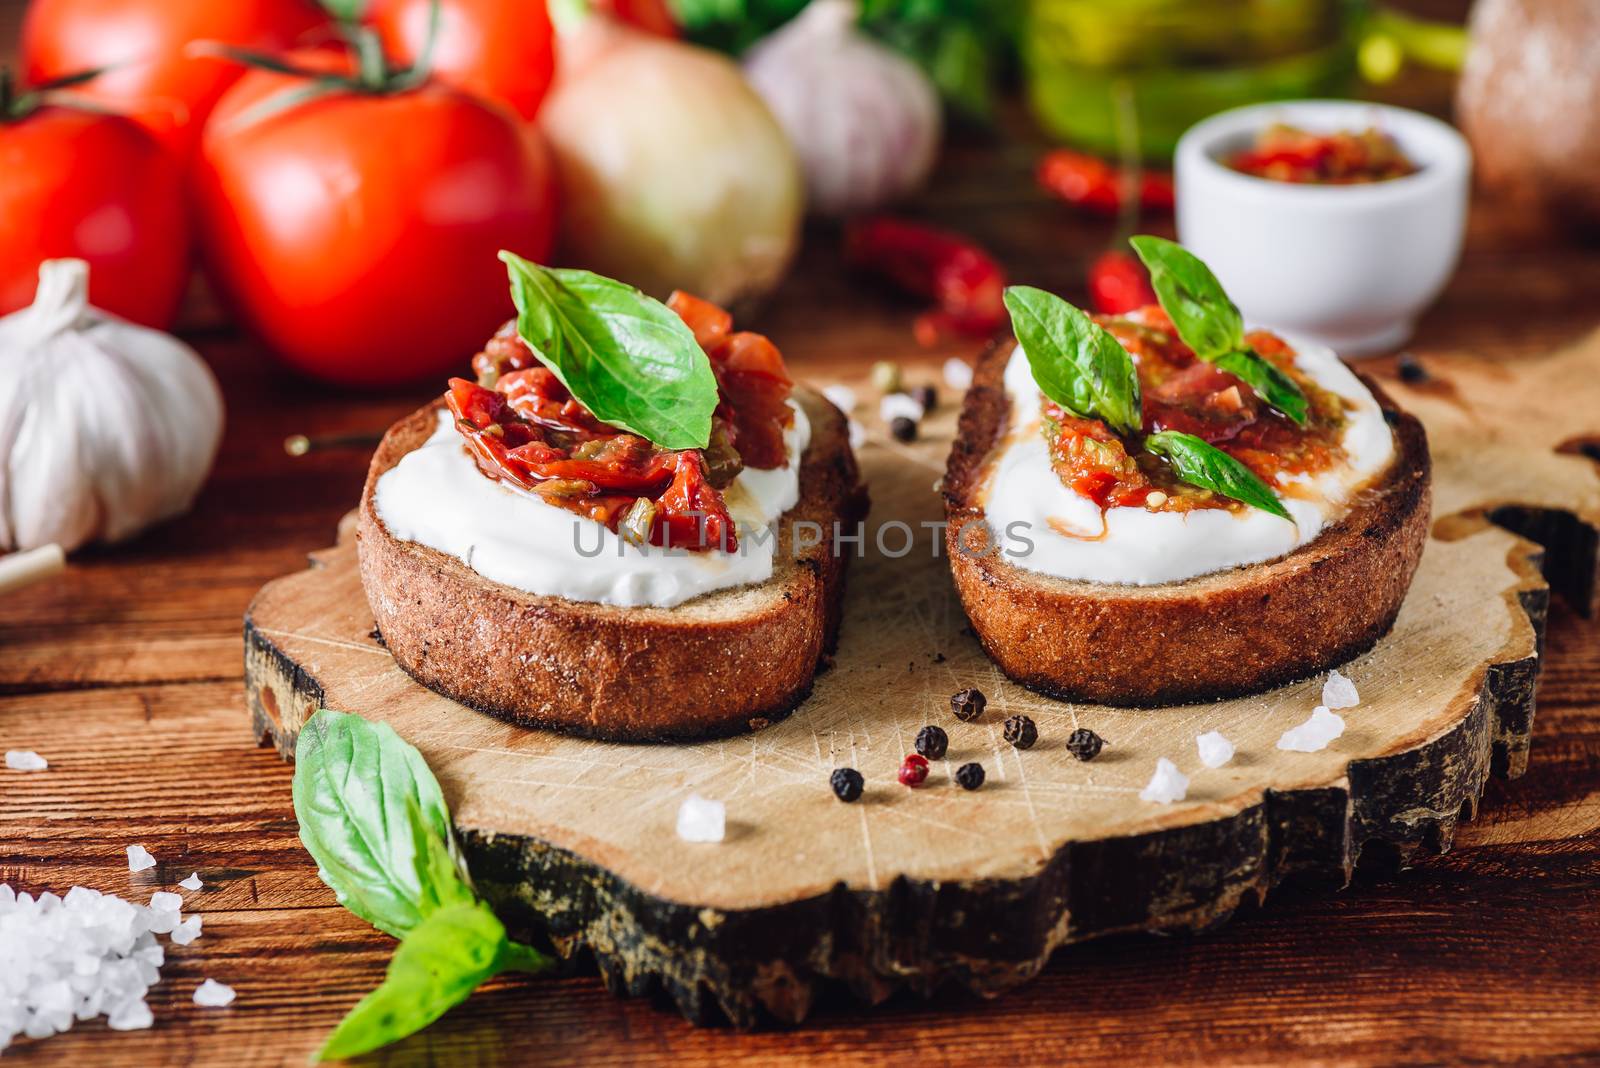 Bruschettas with Dried Tomatoes and Spicy Sauce by Seva_blsv